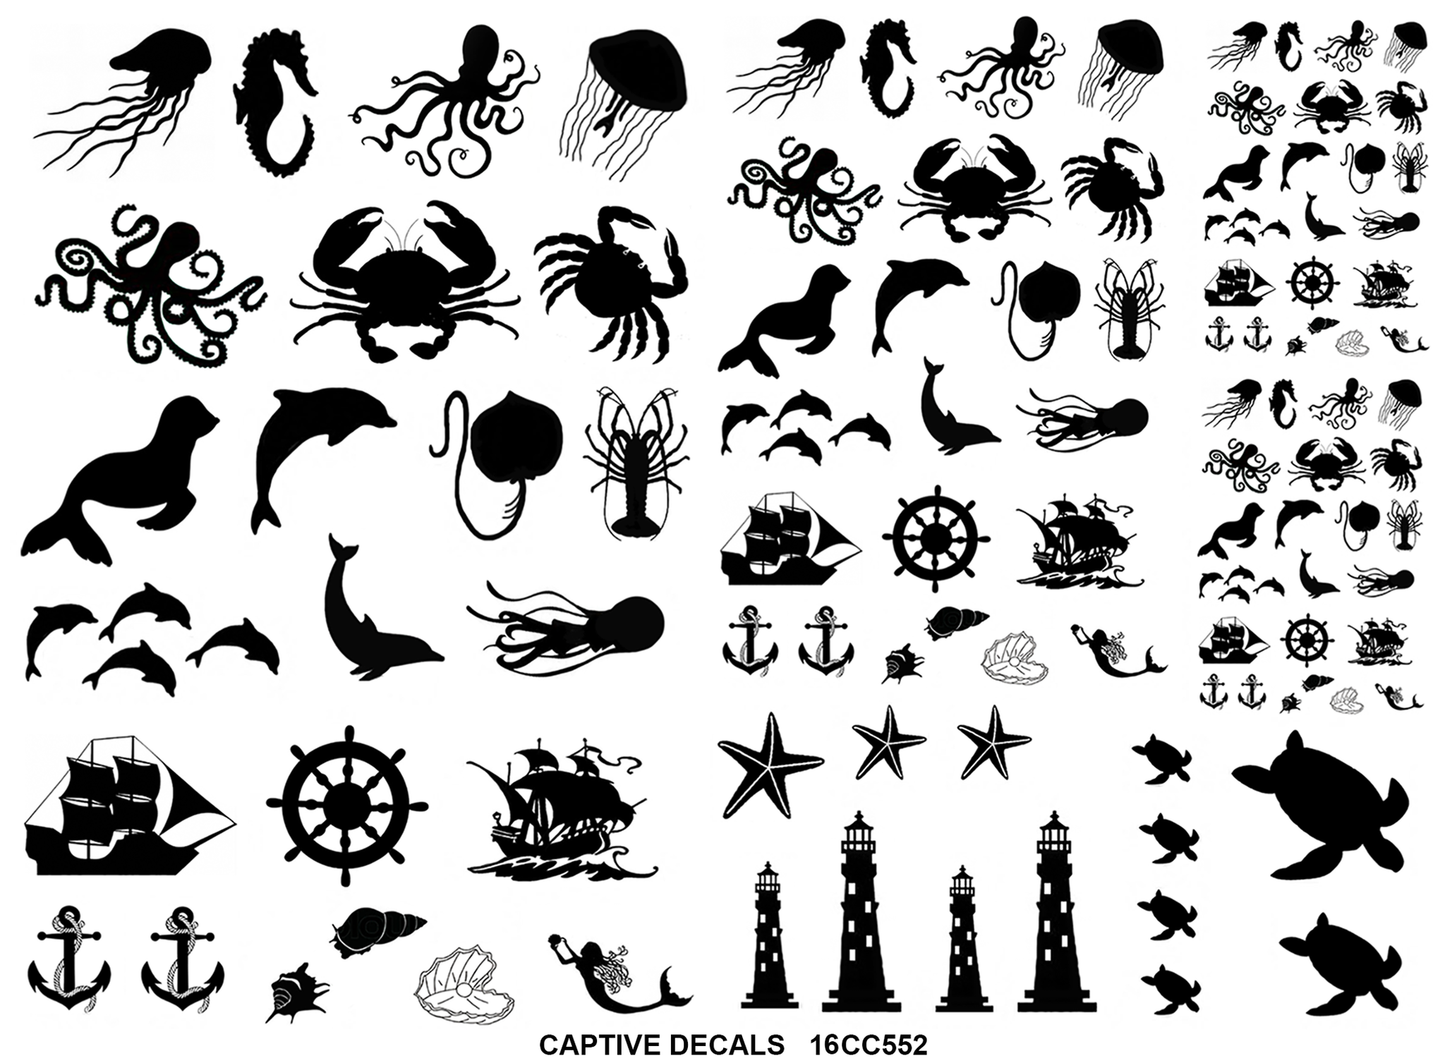 Sea Things 103 pcs 1/4" to 1-1/8" Black Fused Glass Decals